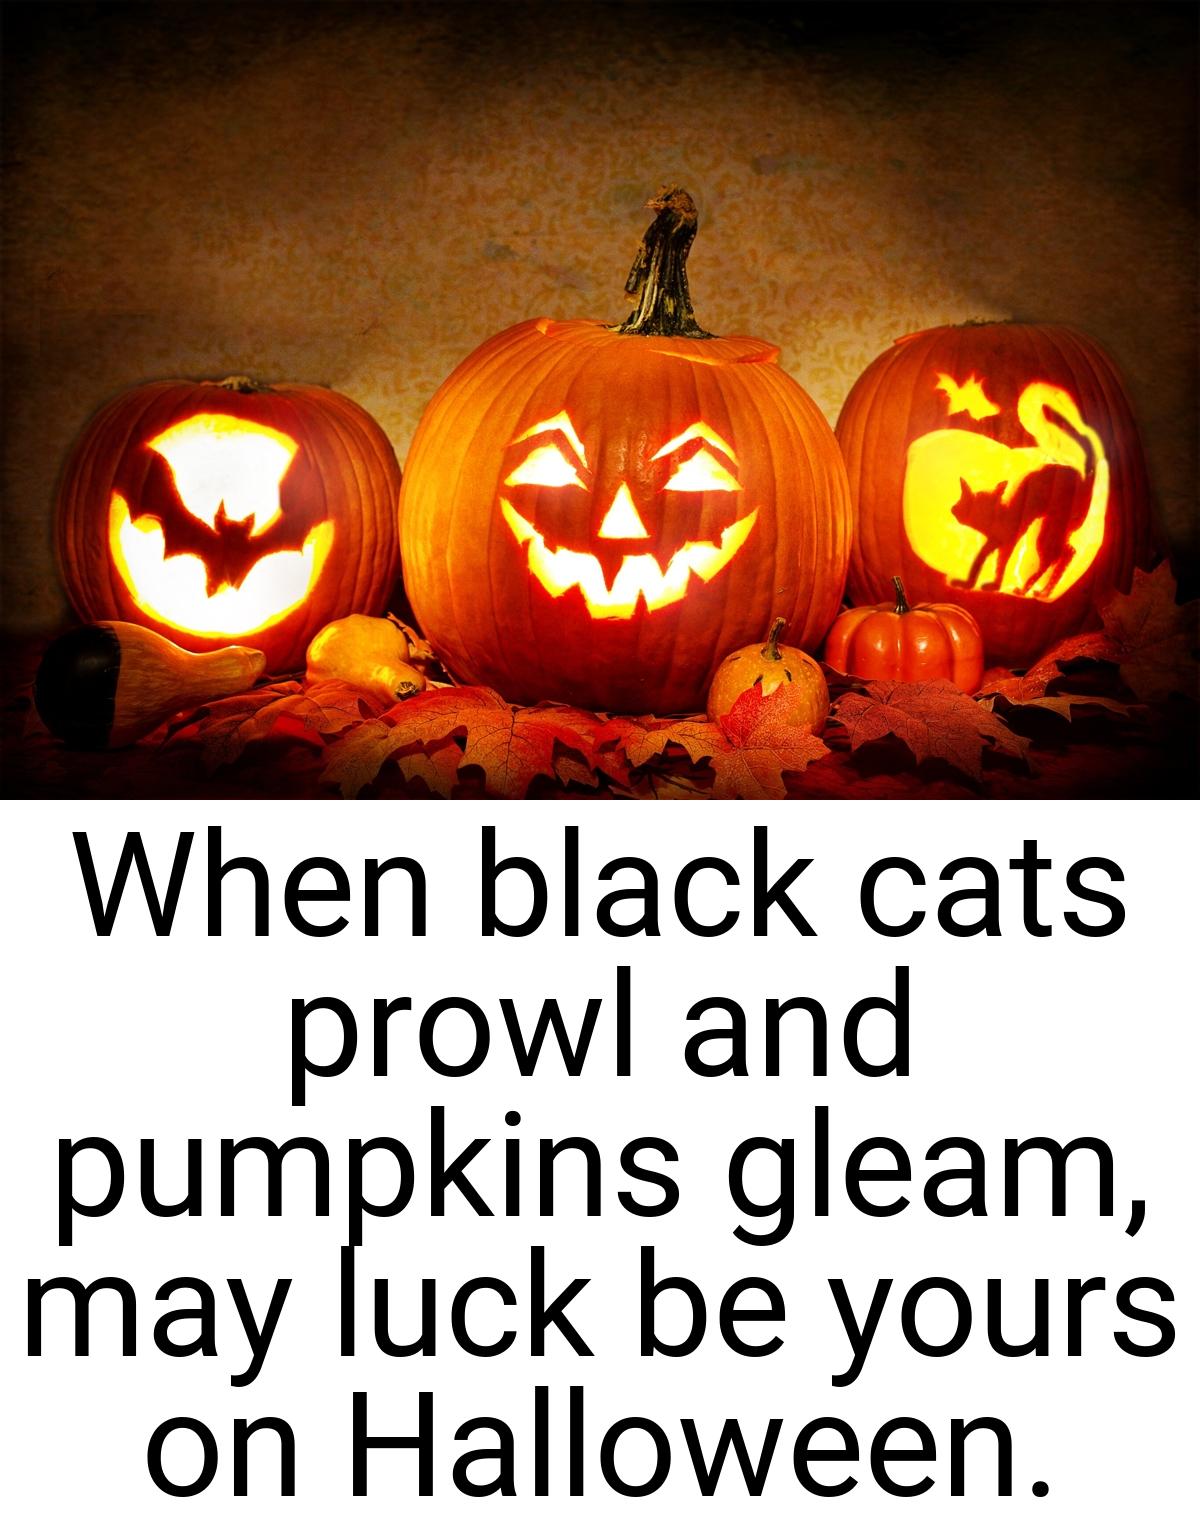 When black cats prowl and pumpkins gleam, may luck be yours